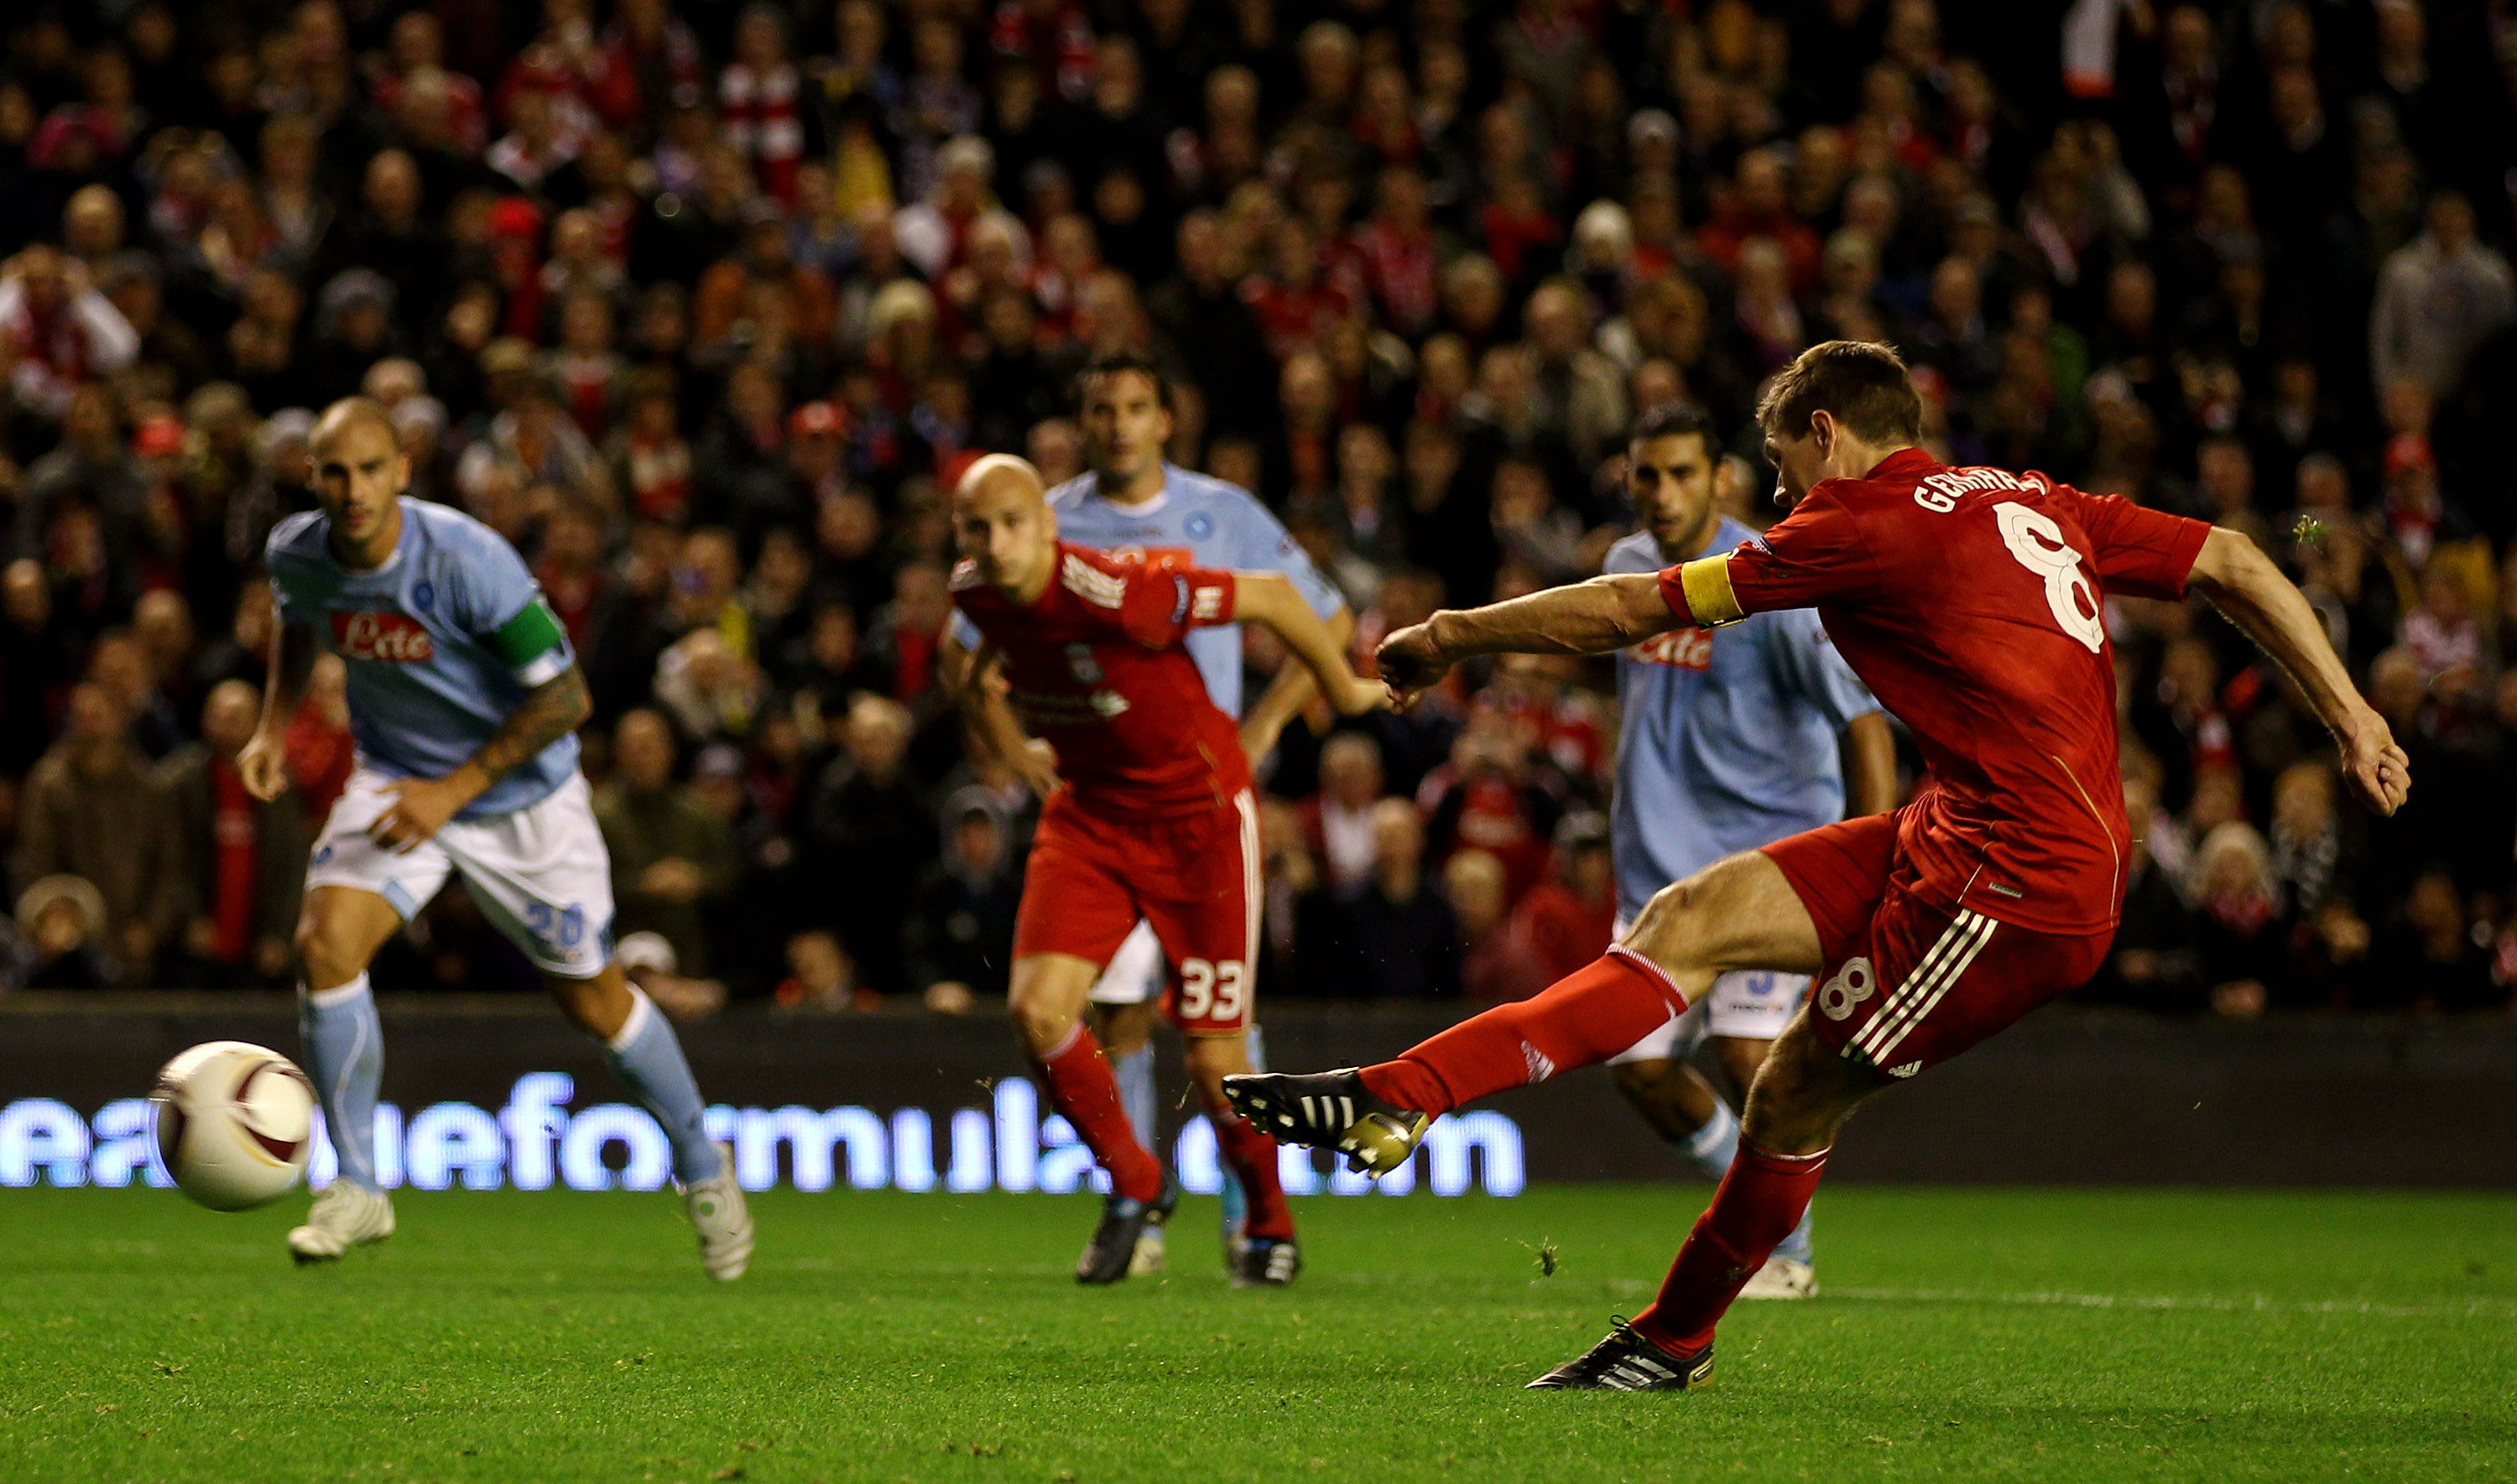 LIVERPOOL, ENGLAND - NOVEMBER 04:  Steven Gerrard of Liverpool scores his team's second goal from the penalty spot during the UEFA Europa League Group K match beteween Liverpool and SSC Napoli at Anfield on November 4, 2010 in Liverpool, England.  (Photo